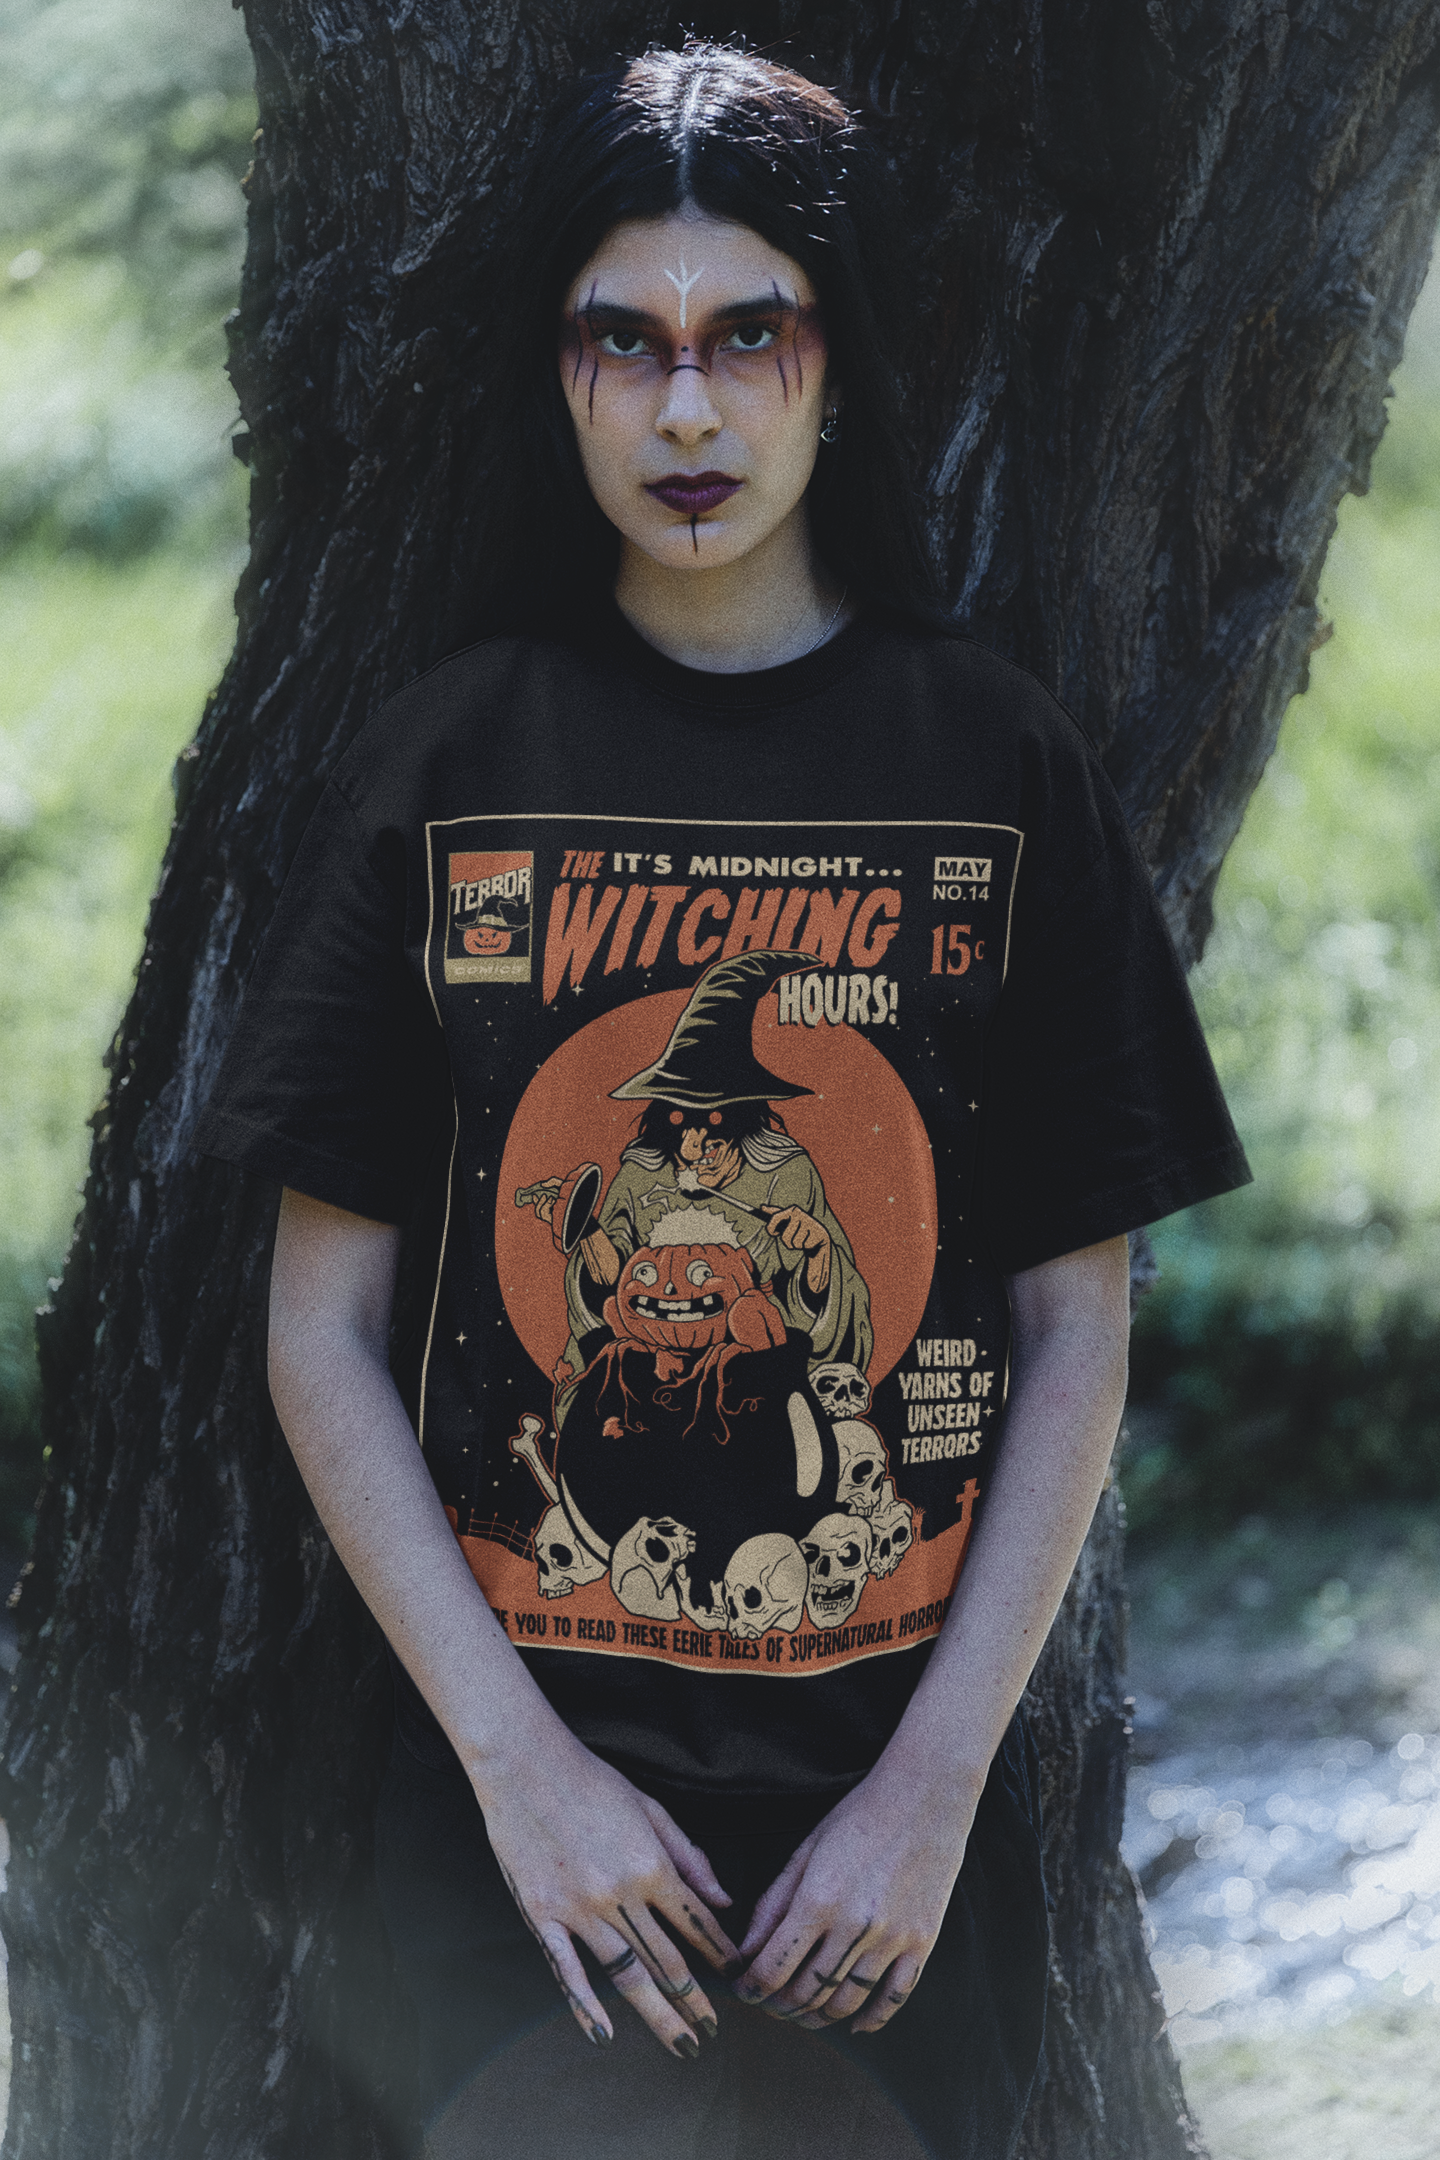 The Witching Hours Comic Cover Reproduction T-Shirt